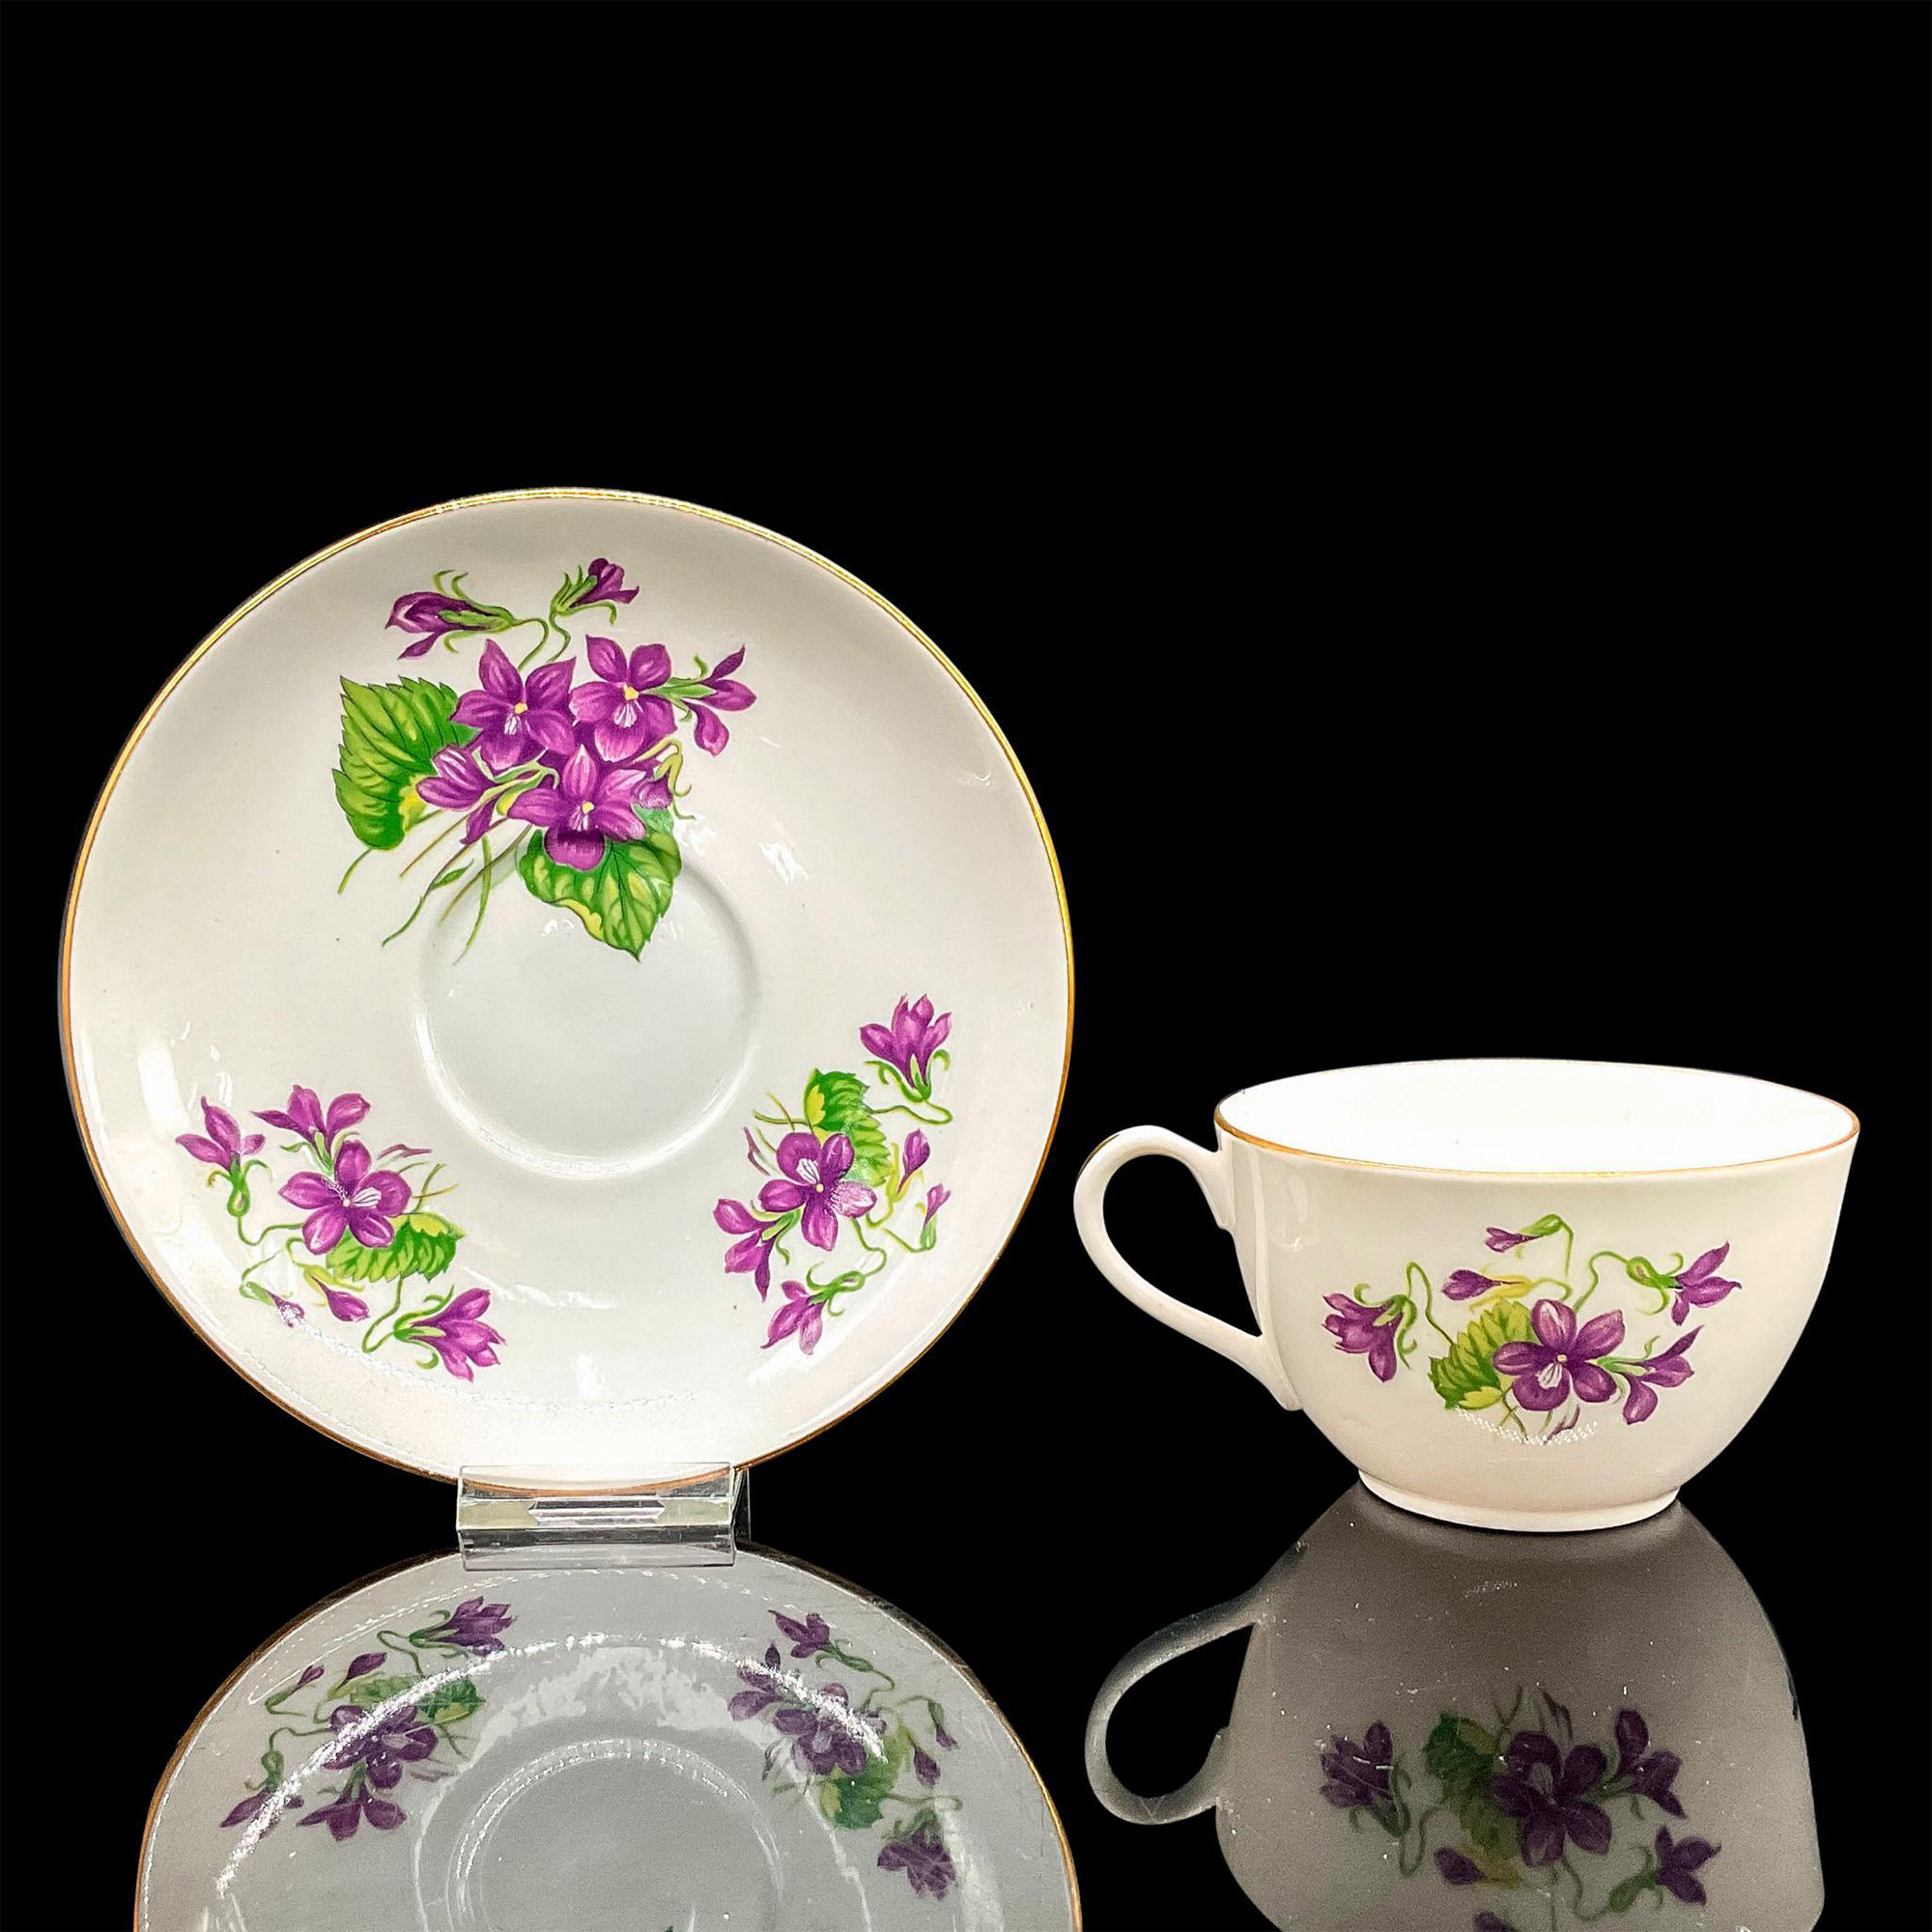 4pc Shelley England Cups and Saucers, Violets - Image 2 of 3